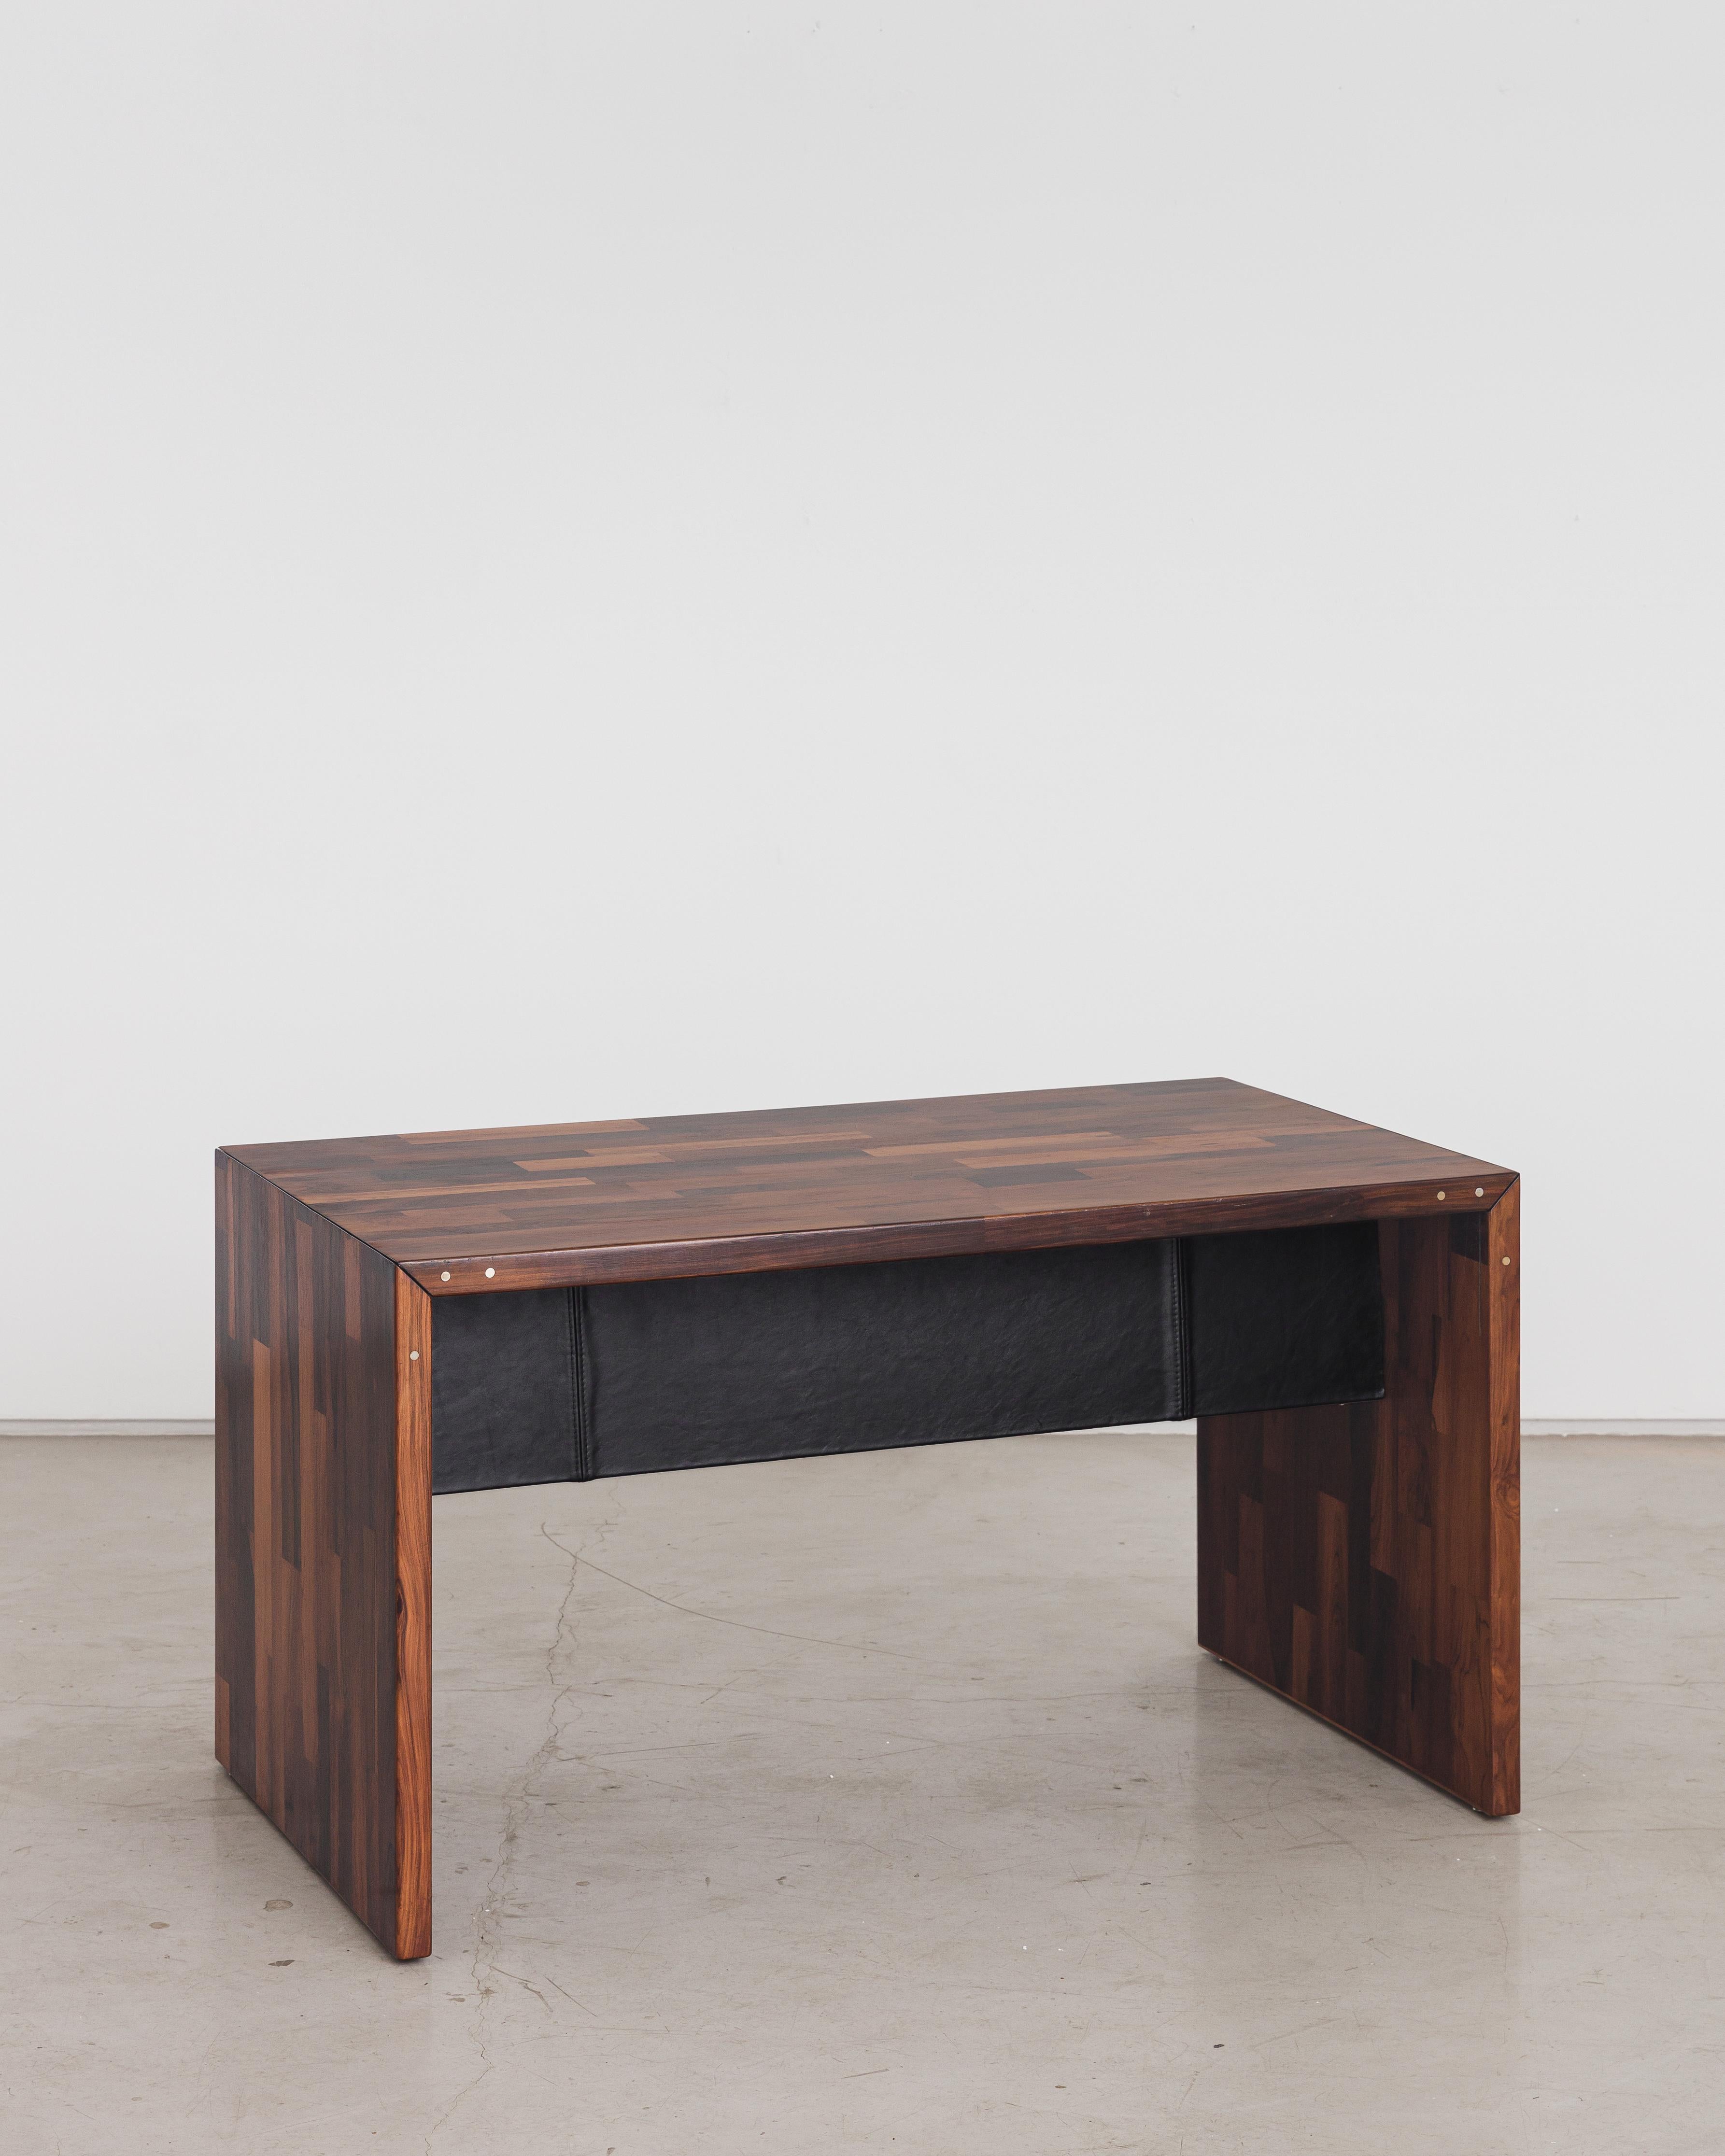 Writing desk designed by Jorge Zalszupin and manufactured by his company, L'atelier. This piece is covered with rectangular pieces of marquetry wood, a creative resource developed by Zalszupin. The technique consists of gluing several pieces of